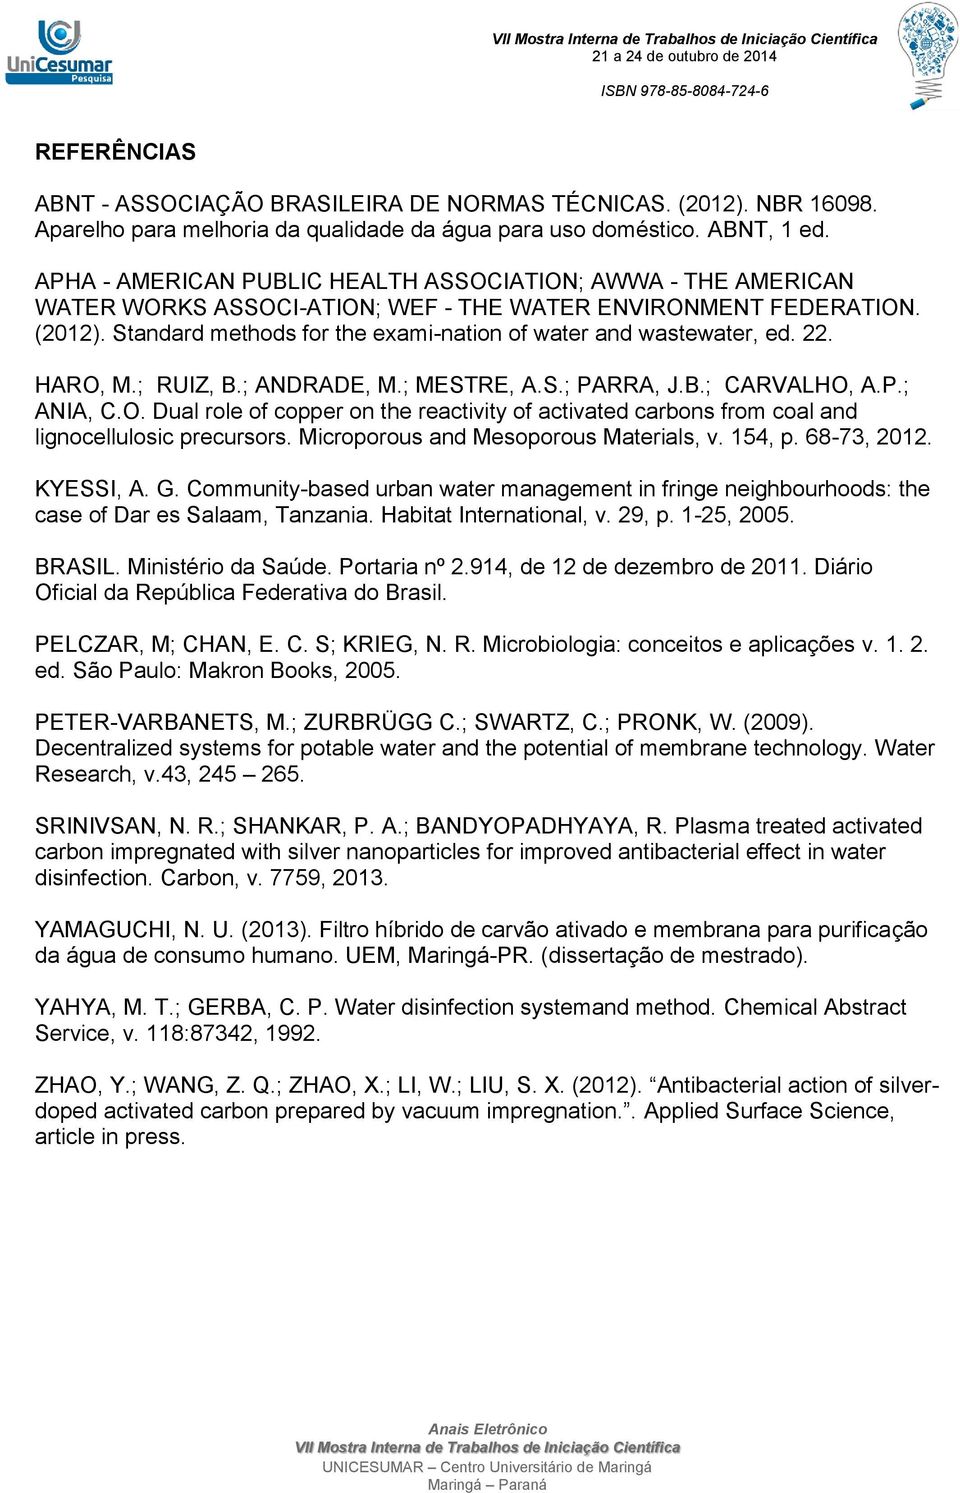 Standard methods for the exami-nation of water and wastewater, ed. 22. HARO, M.; RUIZ, B.; ANDRADE, M.; MESTRE, A.S.; PARRA, J.B.; CARVALHO, A.P.; ANIA, C.O. Dual role of copper on the reactivity of activated carbons from coal and lignocellulosic precursors.